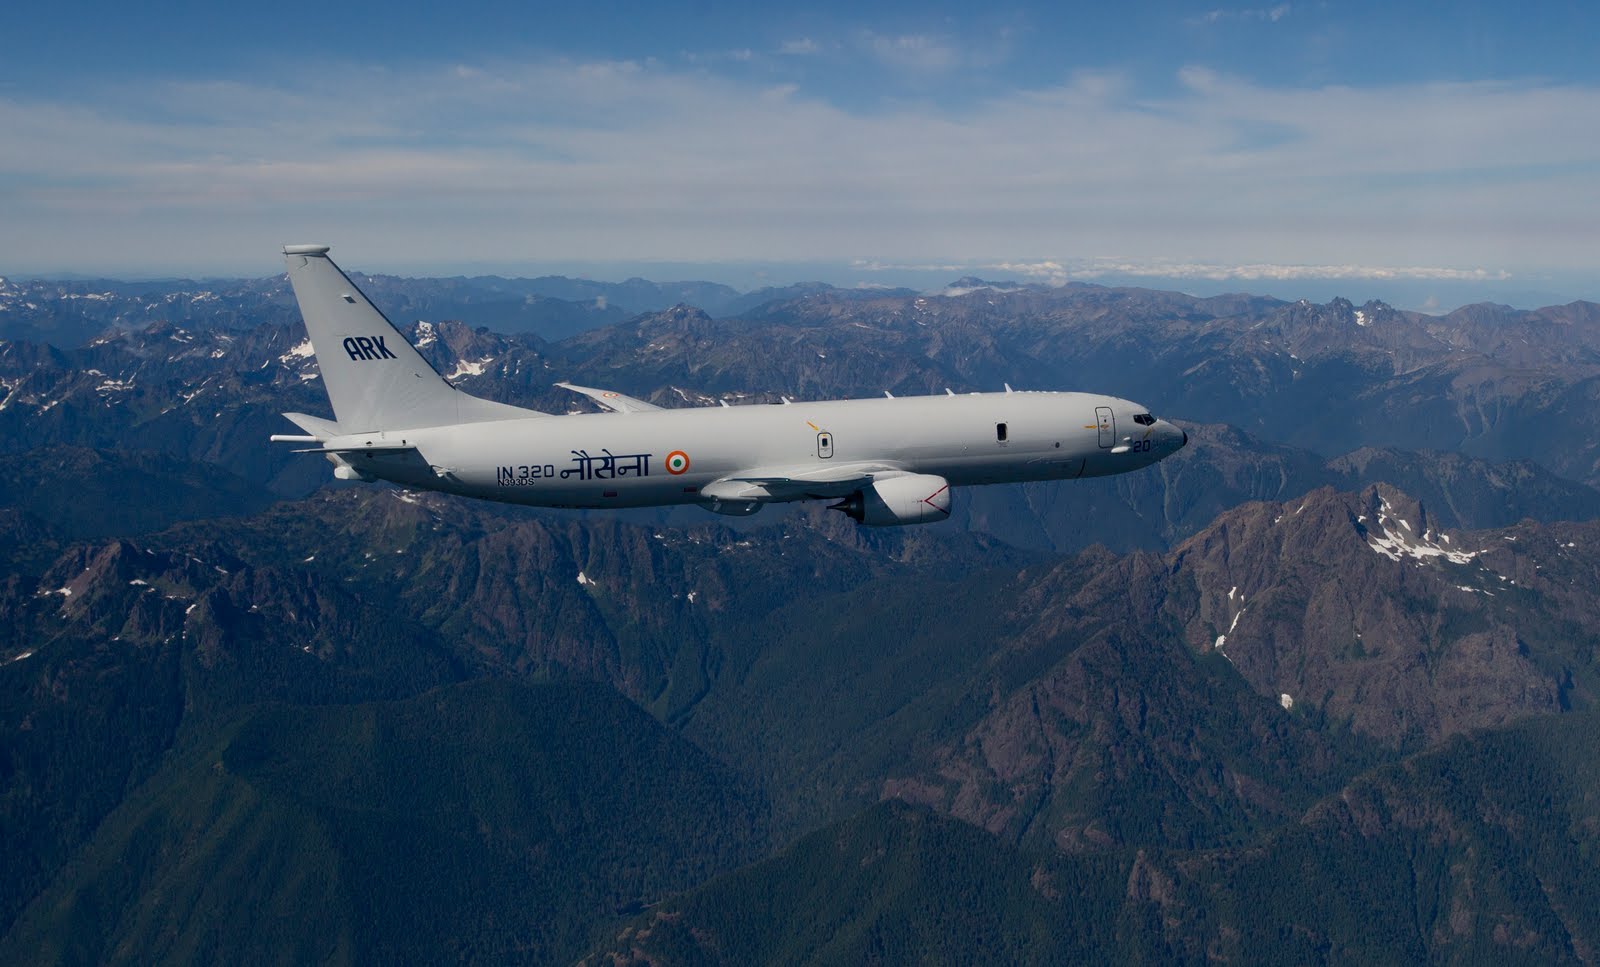 Raytheon Company (NYSE: RTN) has delivered the first international version of its APY-10 surveillance radar to Boeing. The radar will be installed on the P-8I aircraft Boeing is building for the Indian navy. 